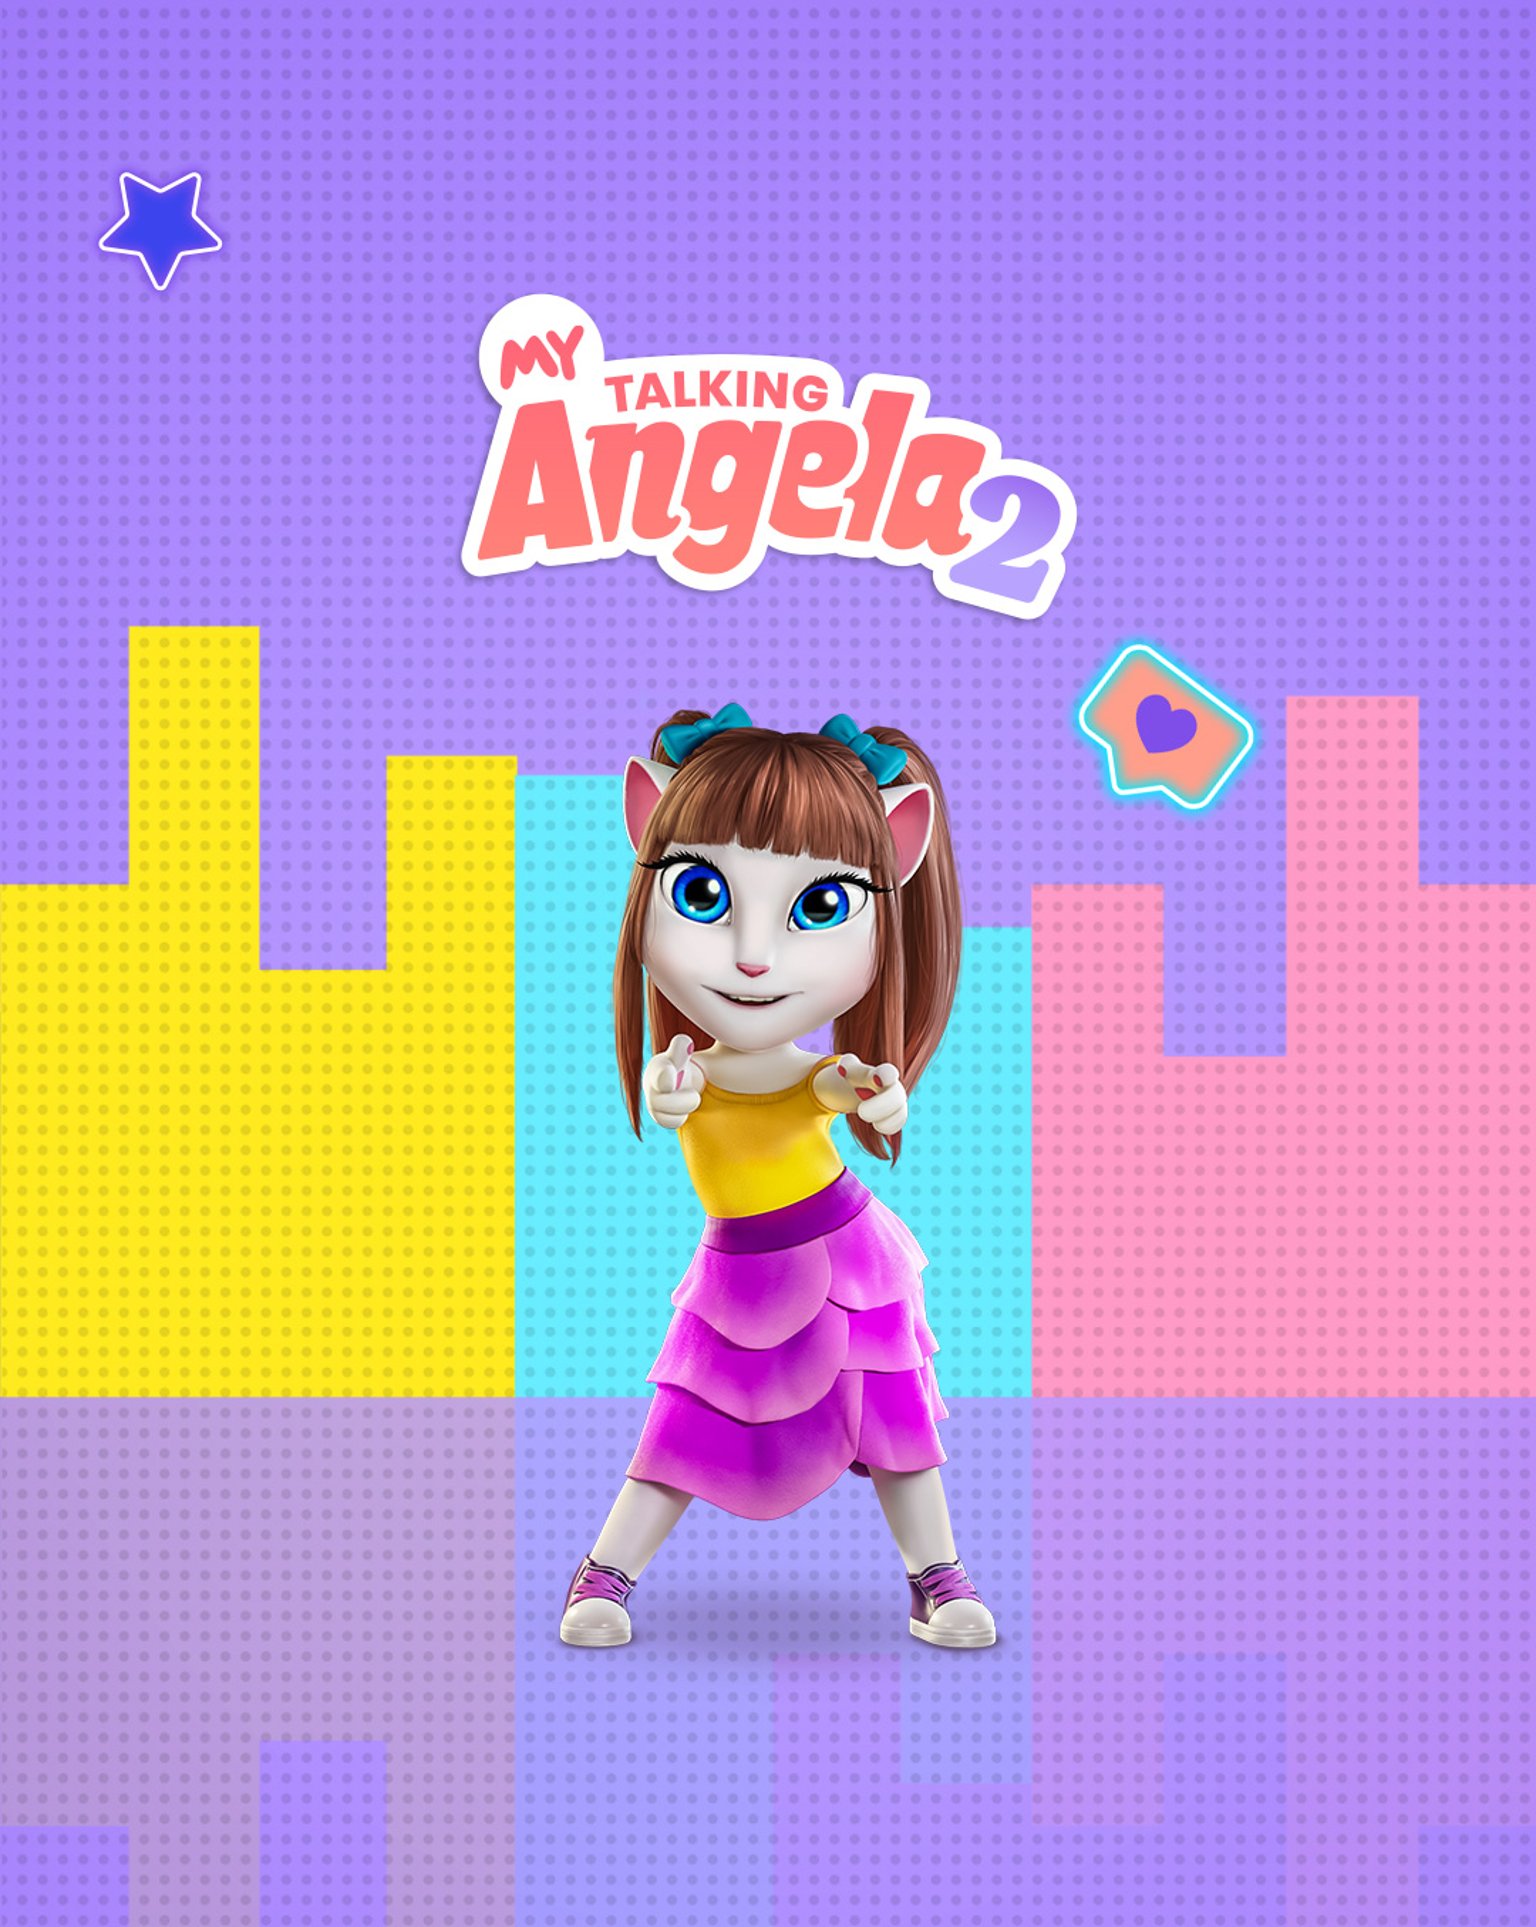 Celebrating an Incredible Year of My Talking Angela 2